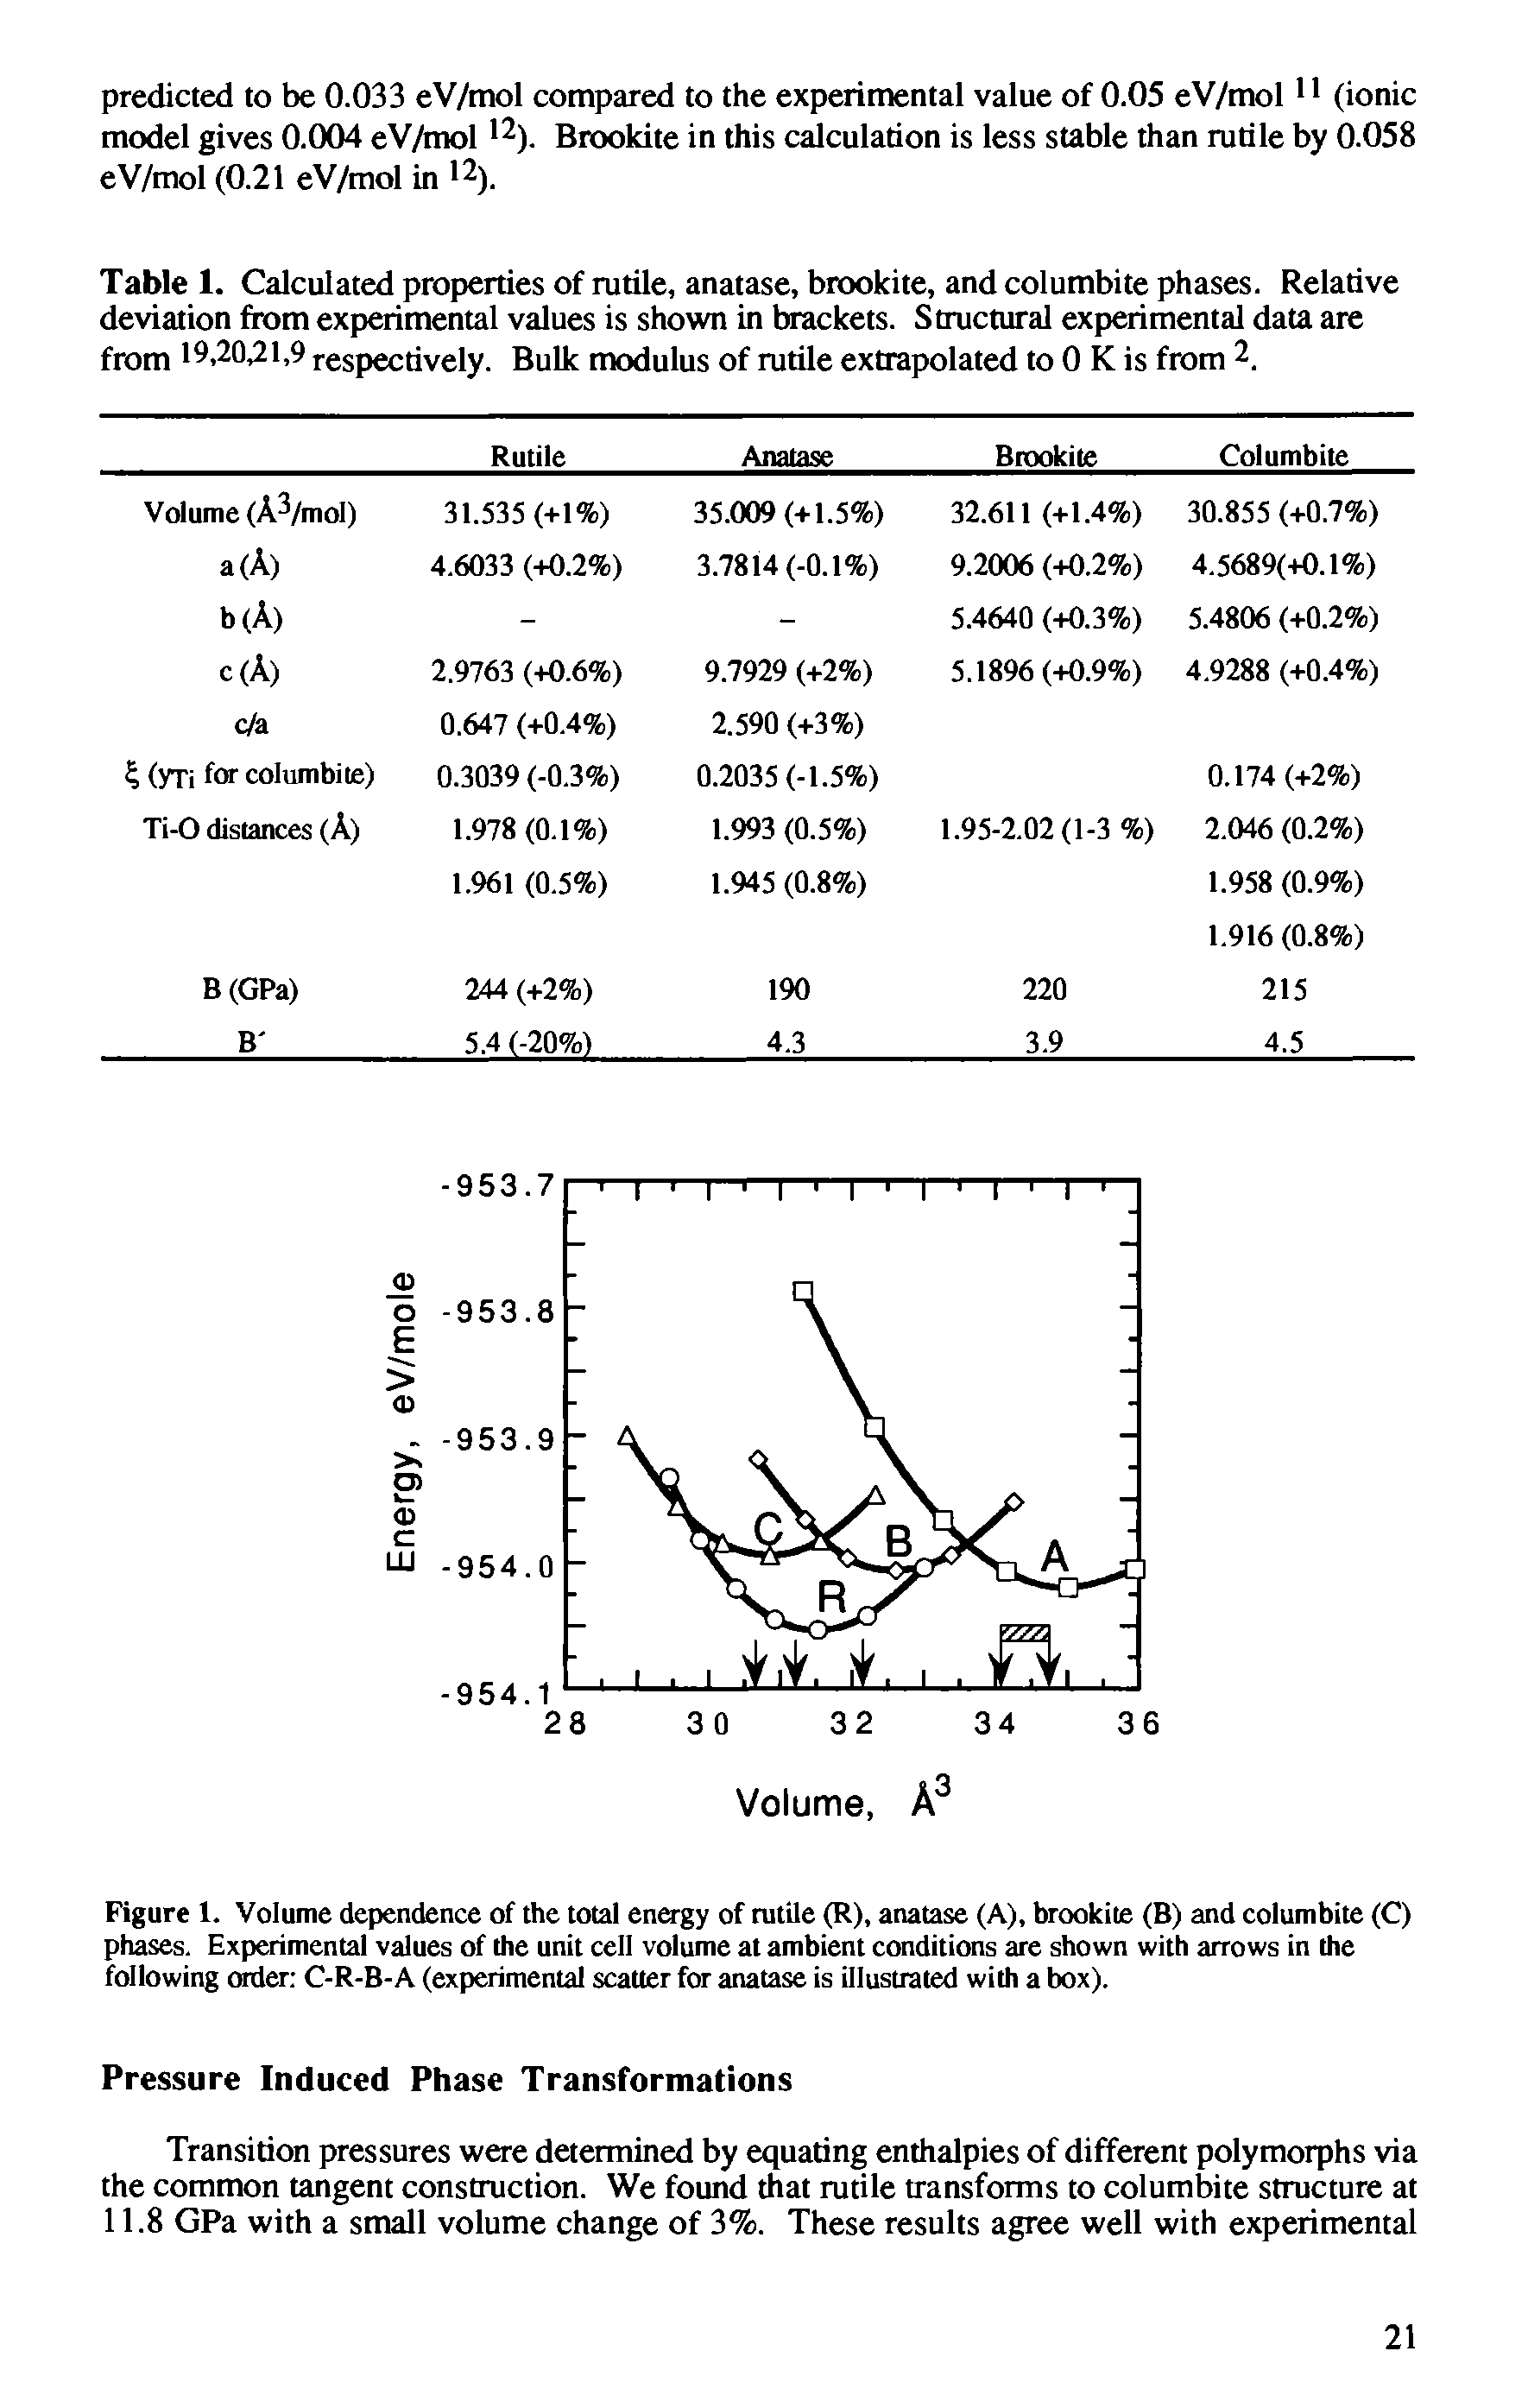 Figure 1. Volume dependence of the total en gy of rutile (R), anatase (A), brookite (B) and columbite (C) phases. Experimental values of the unit cell volume at ambient conditions are shown with arrows in the following (Bder C-R-B-A (experimental scatter for anatase is illustrated with a box).